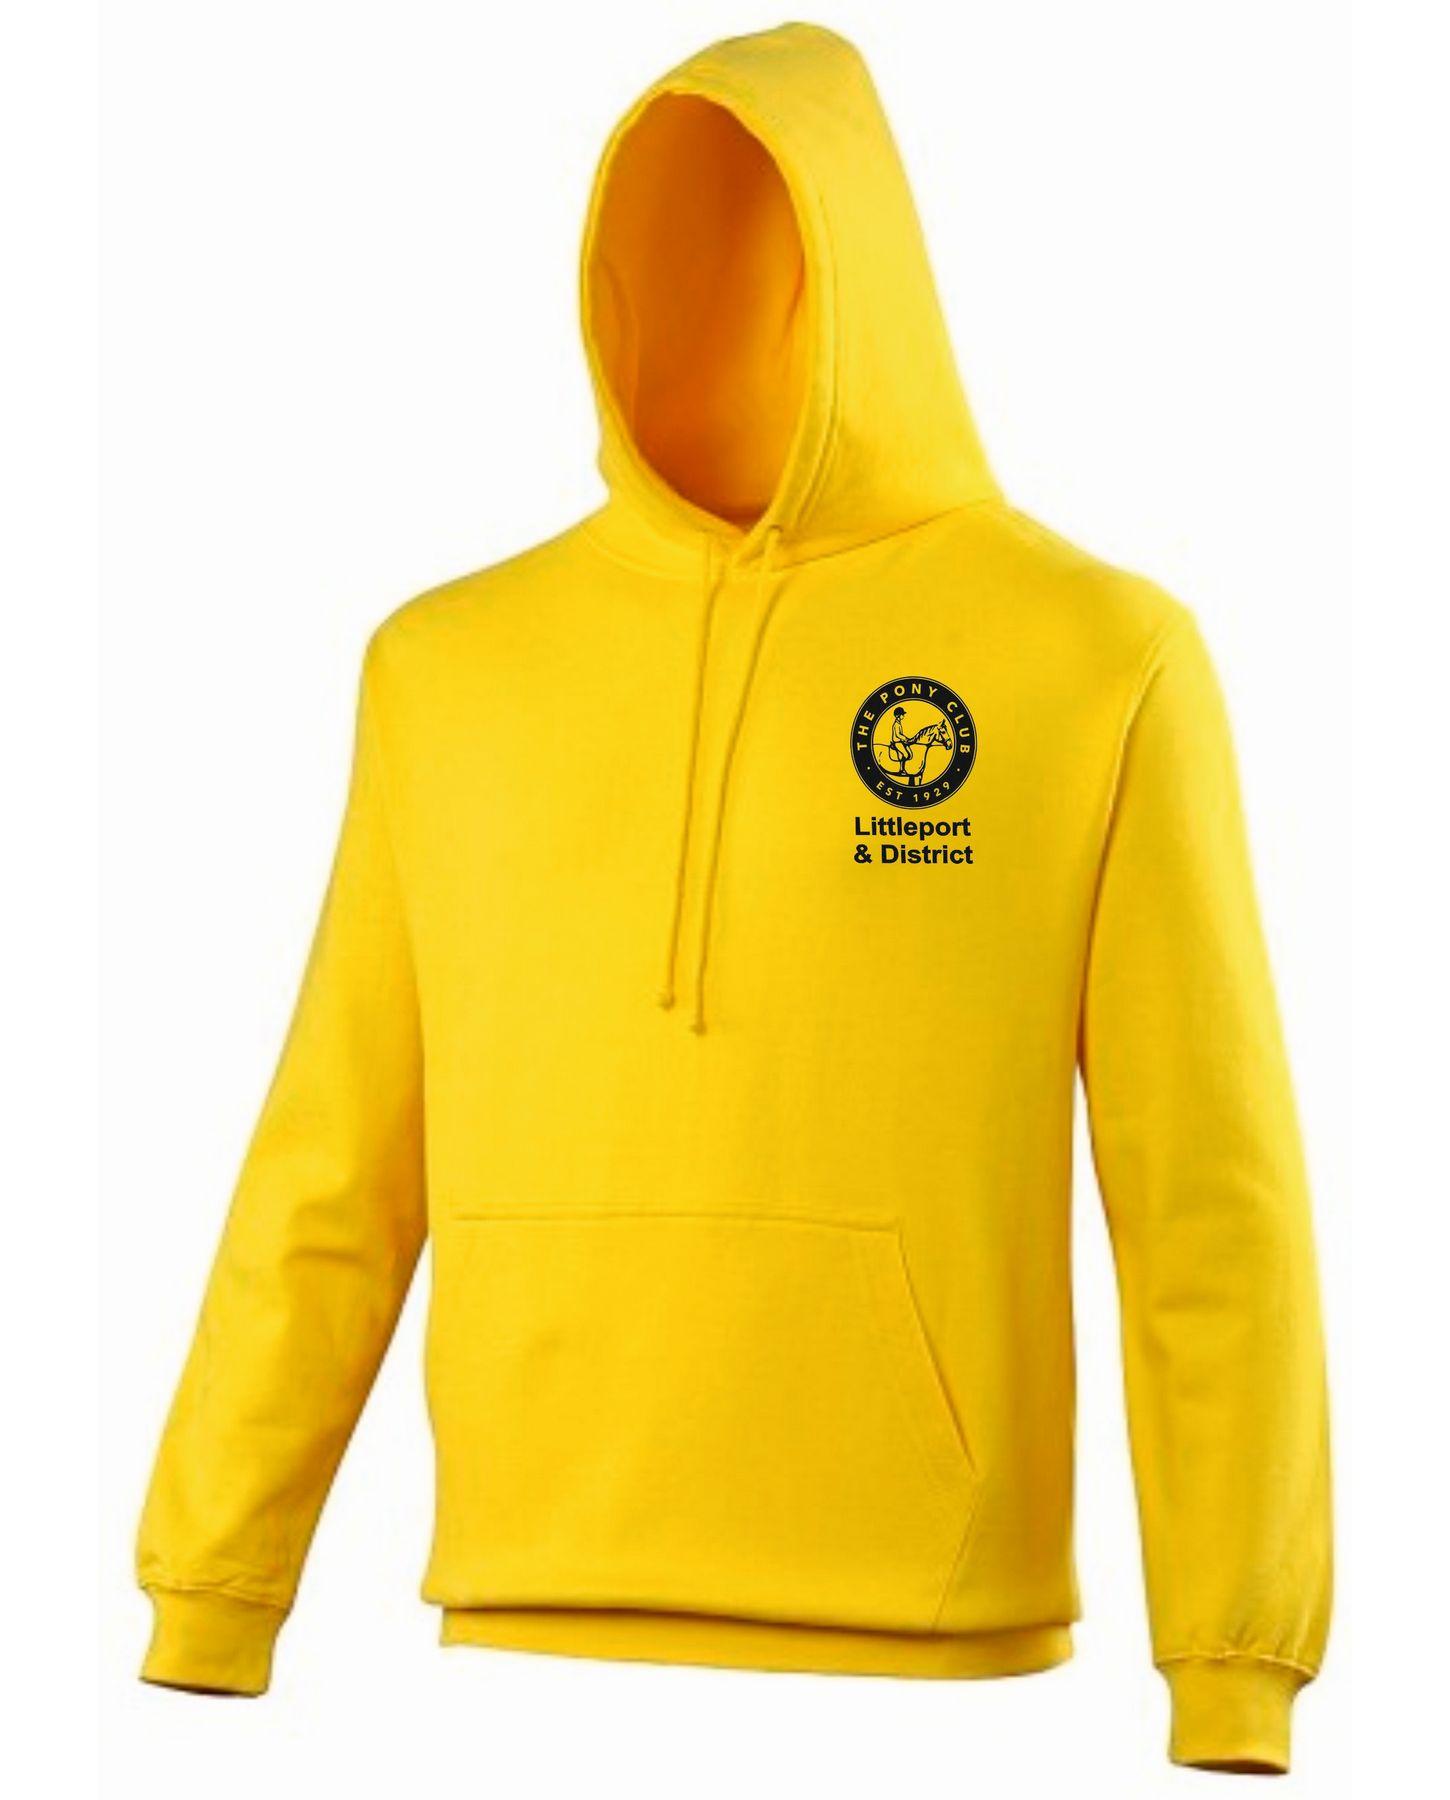 Littleport & District Pony Club – Hoodie Adults